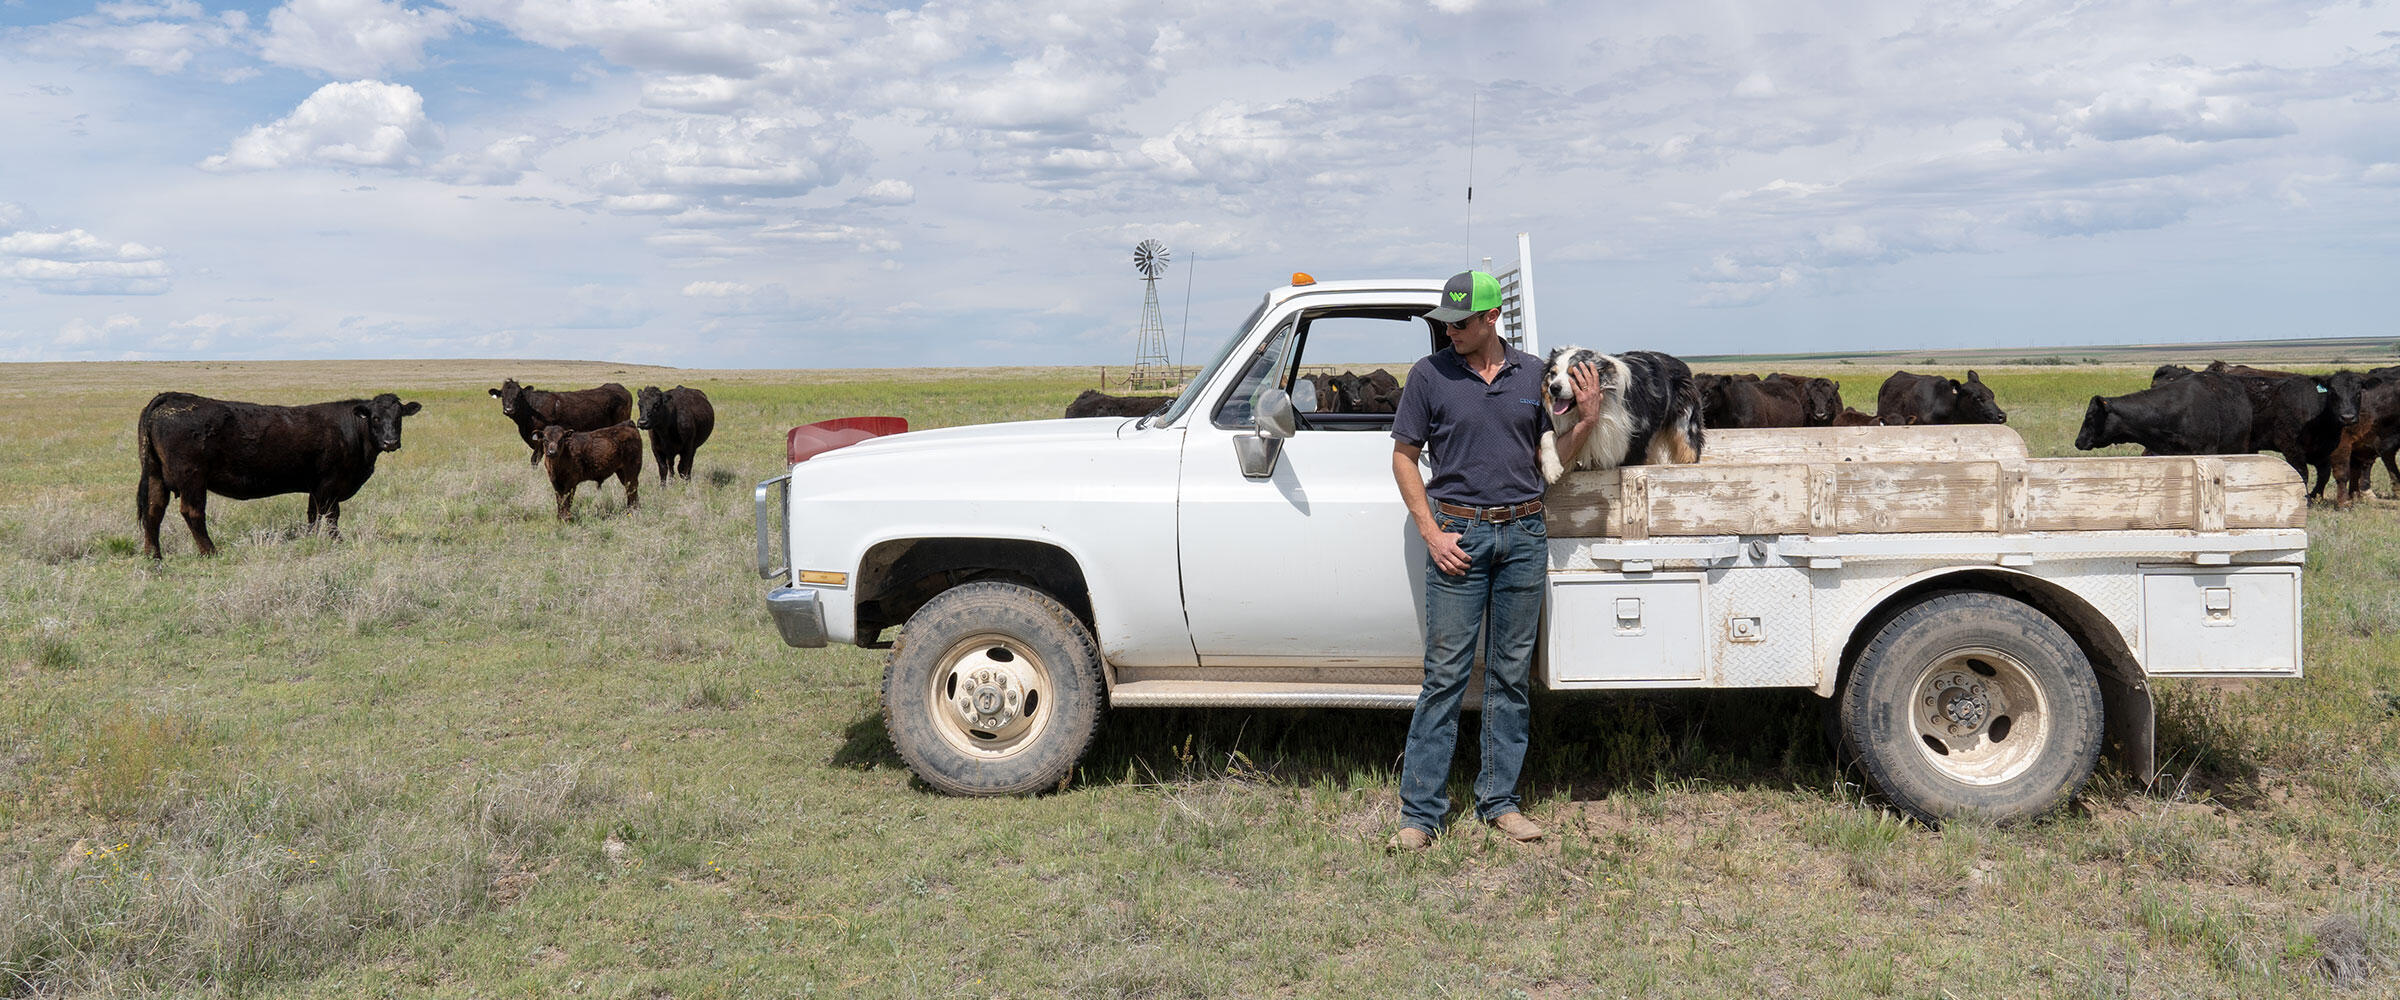 A rancher stands in front of a pickup truck with cows and a windmill in the background.